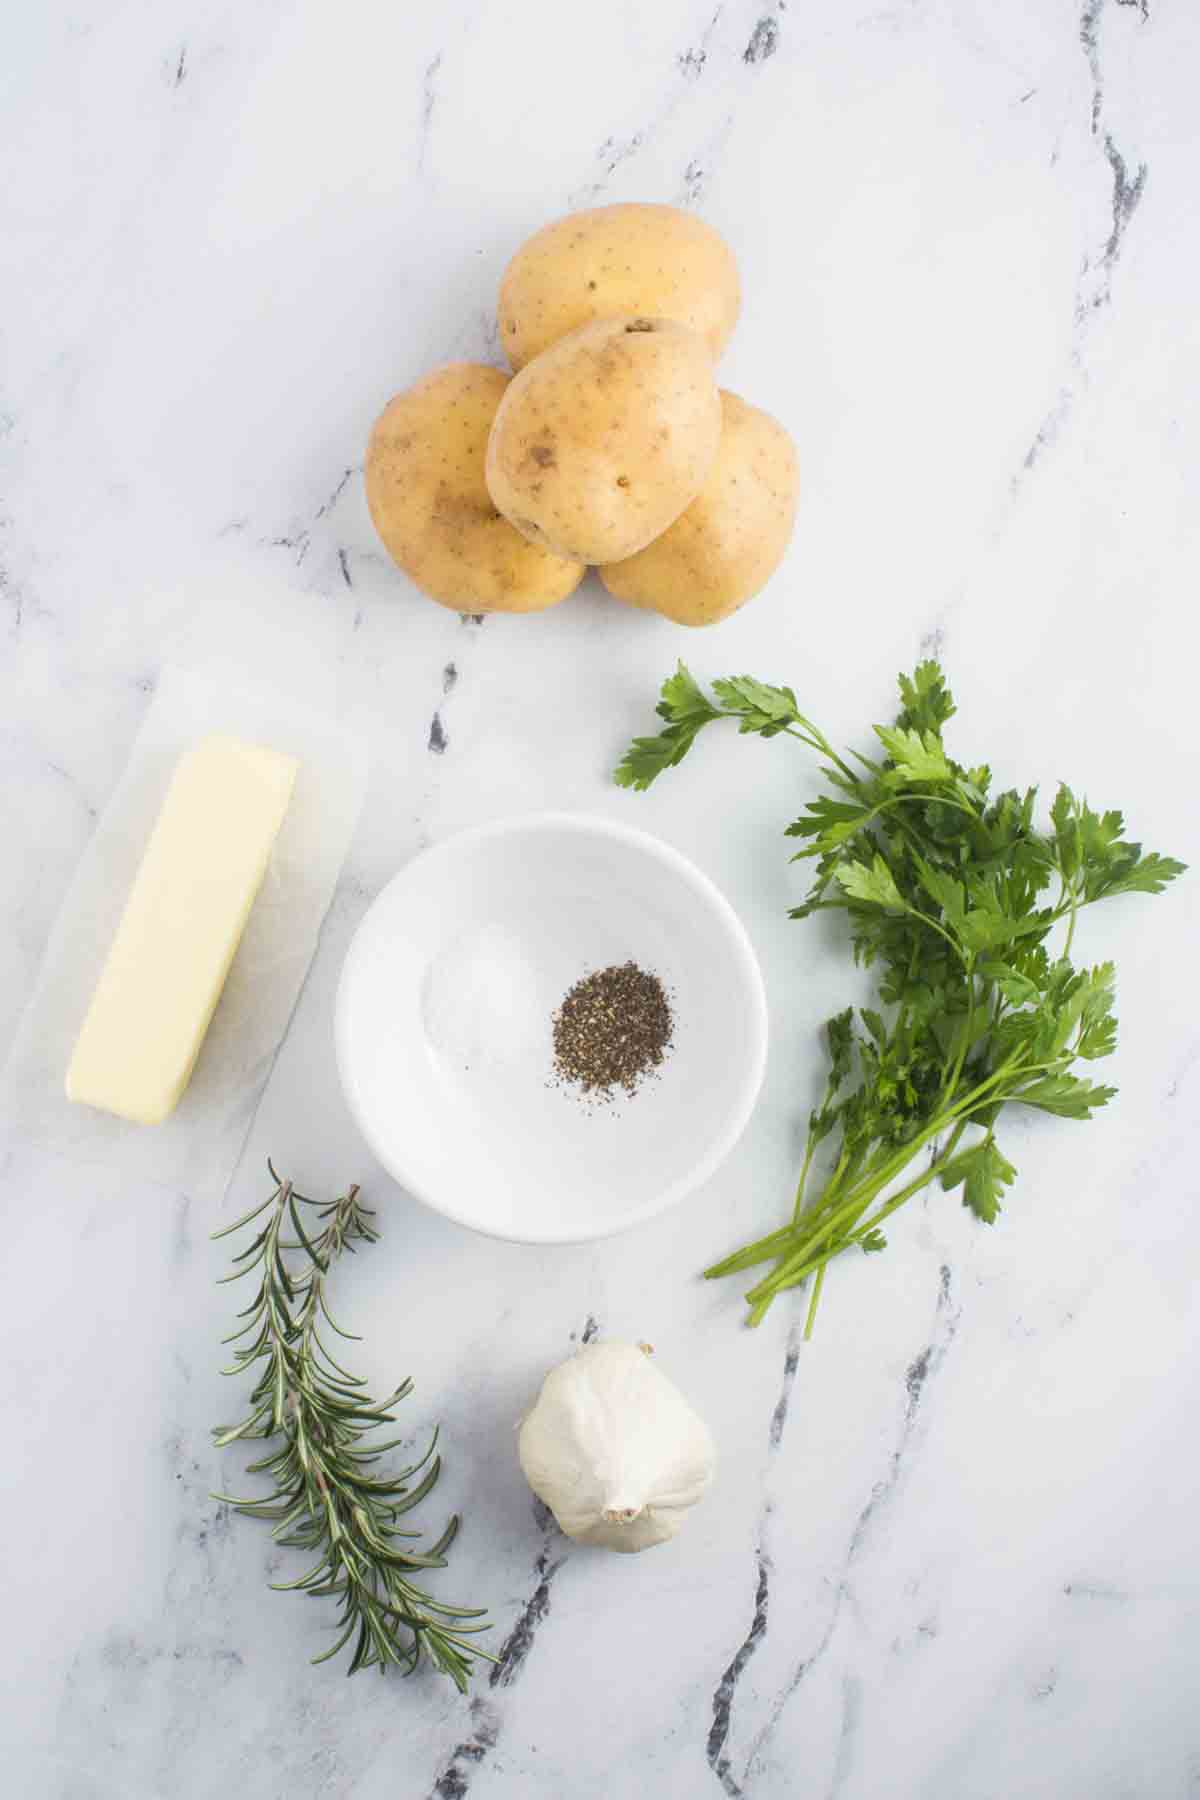 This image is an ingredient shot specifically featuring hasselback potatoes.